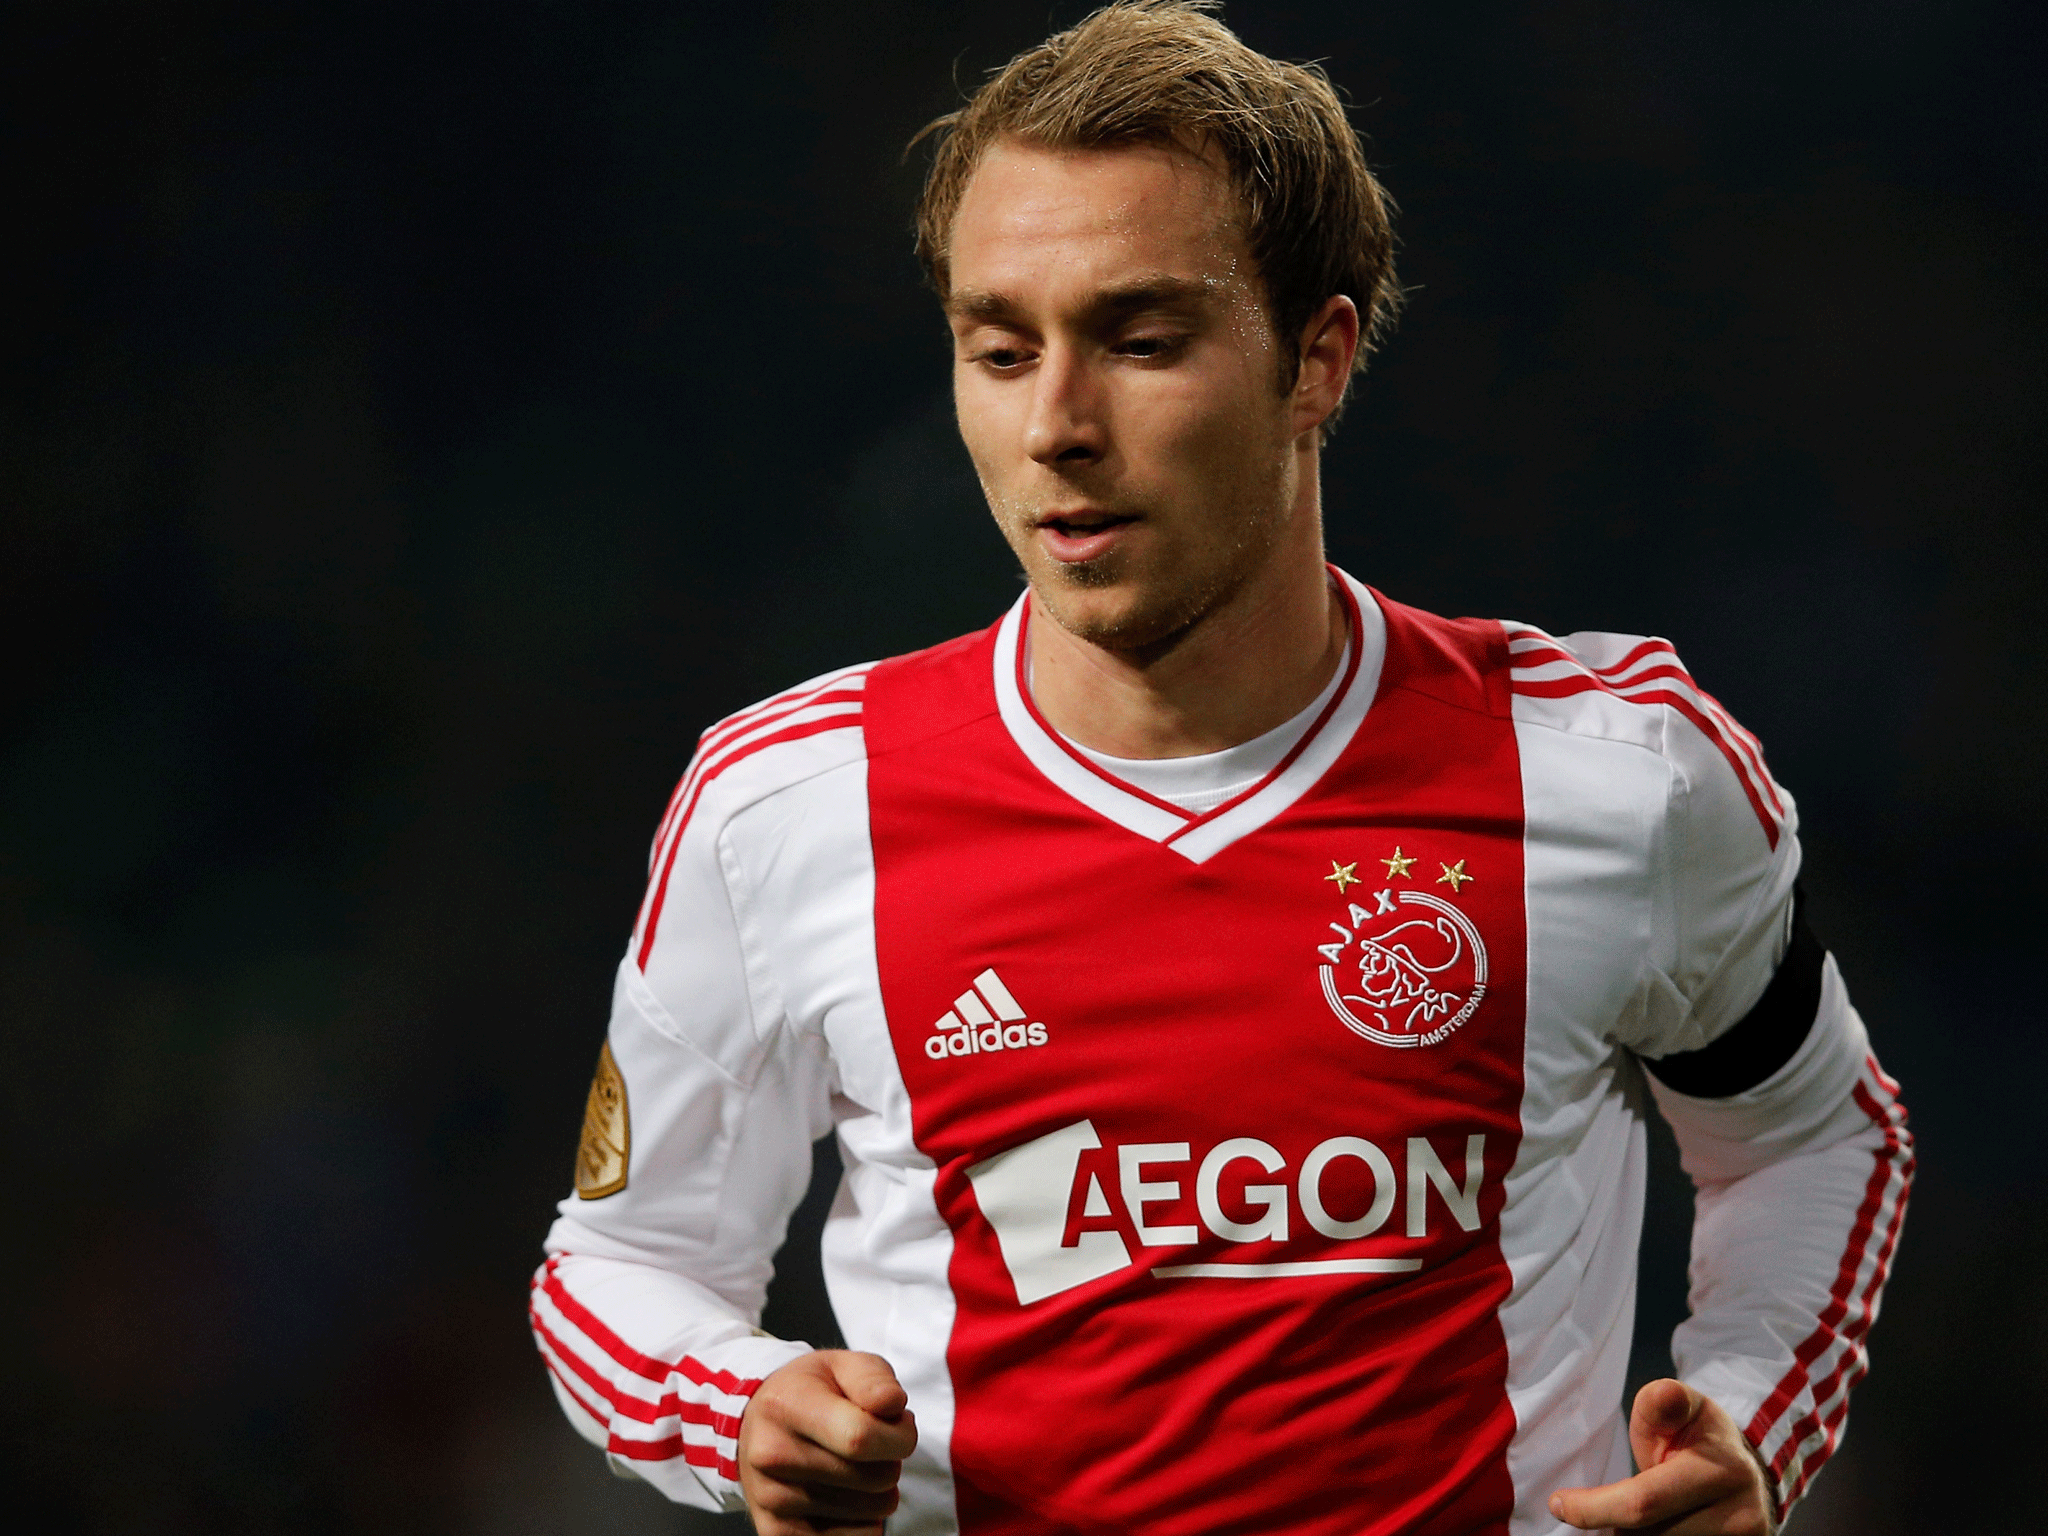 Christian Eriksen would be interested in a move to Tottenham if they make an approach